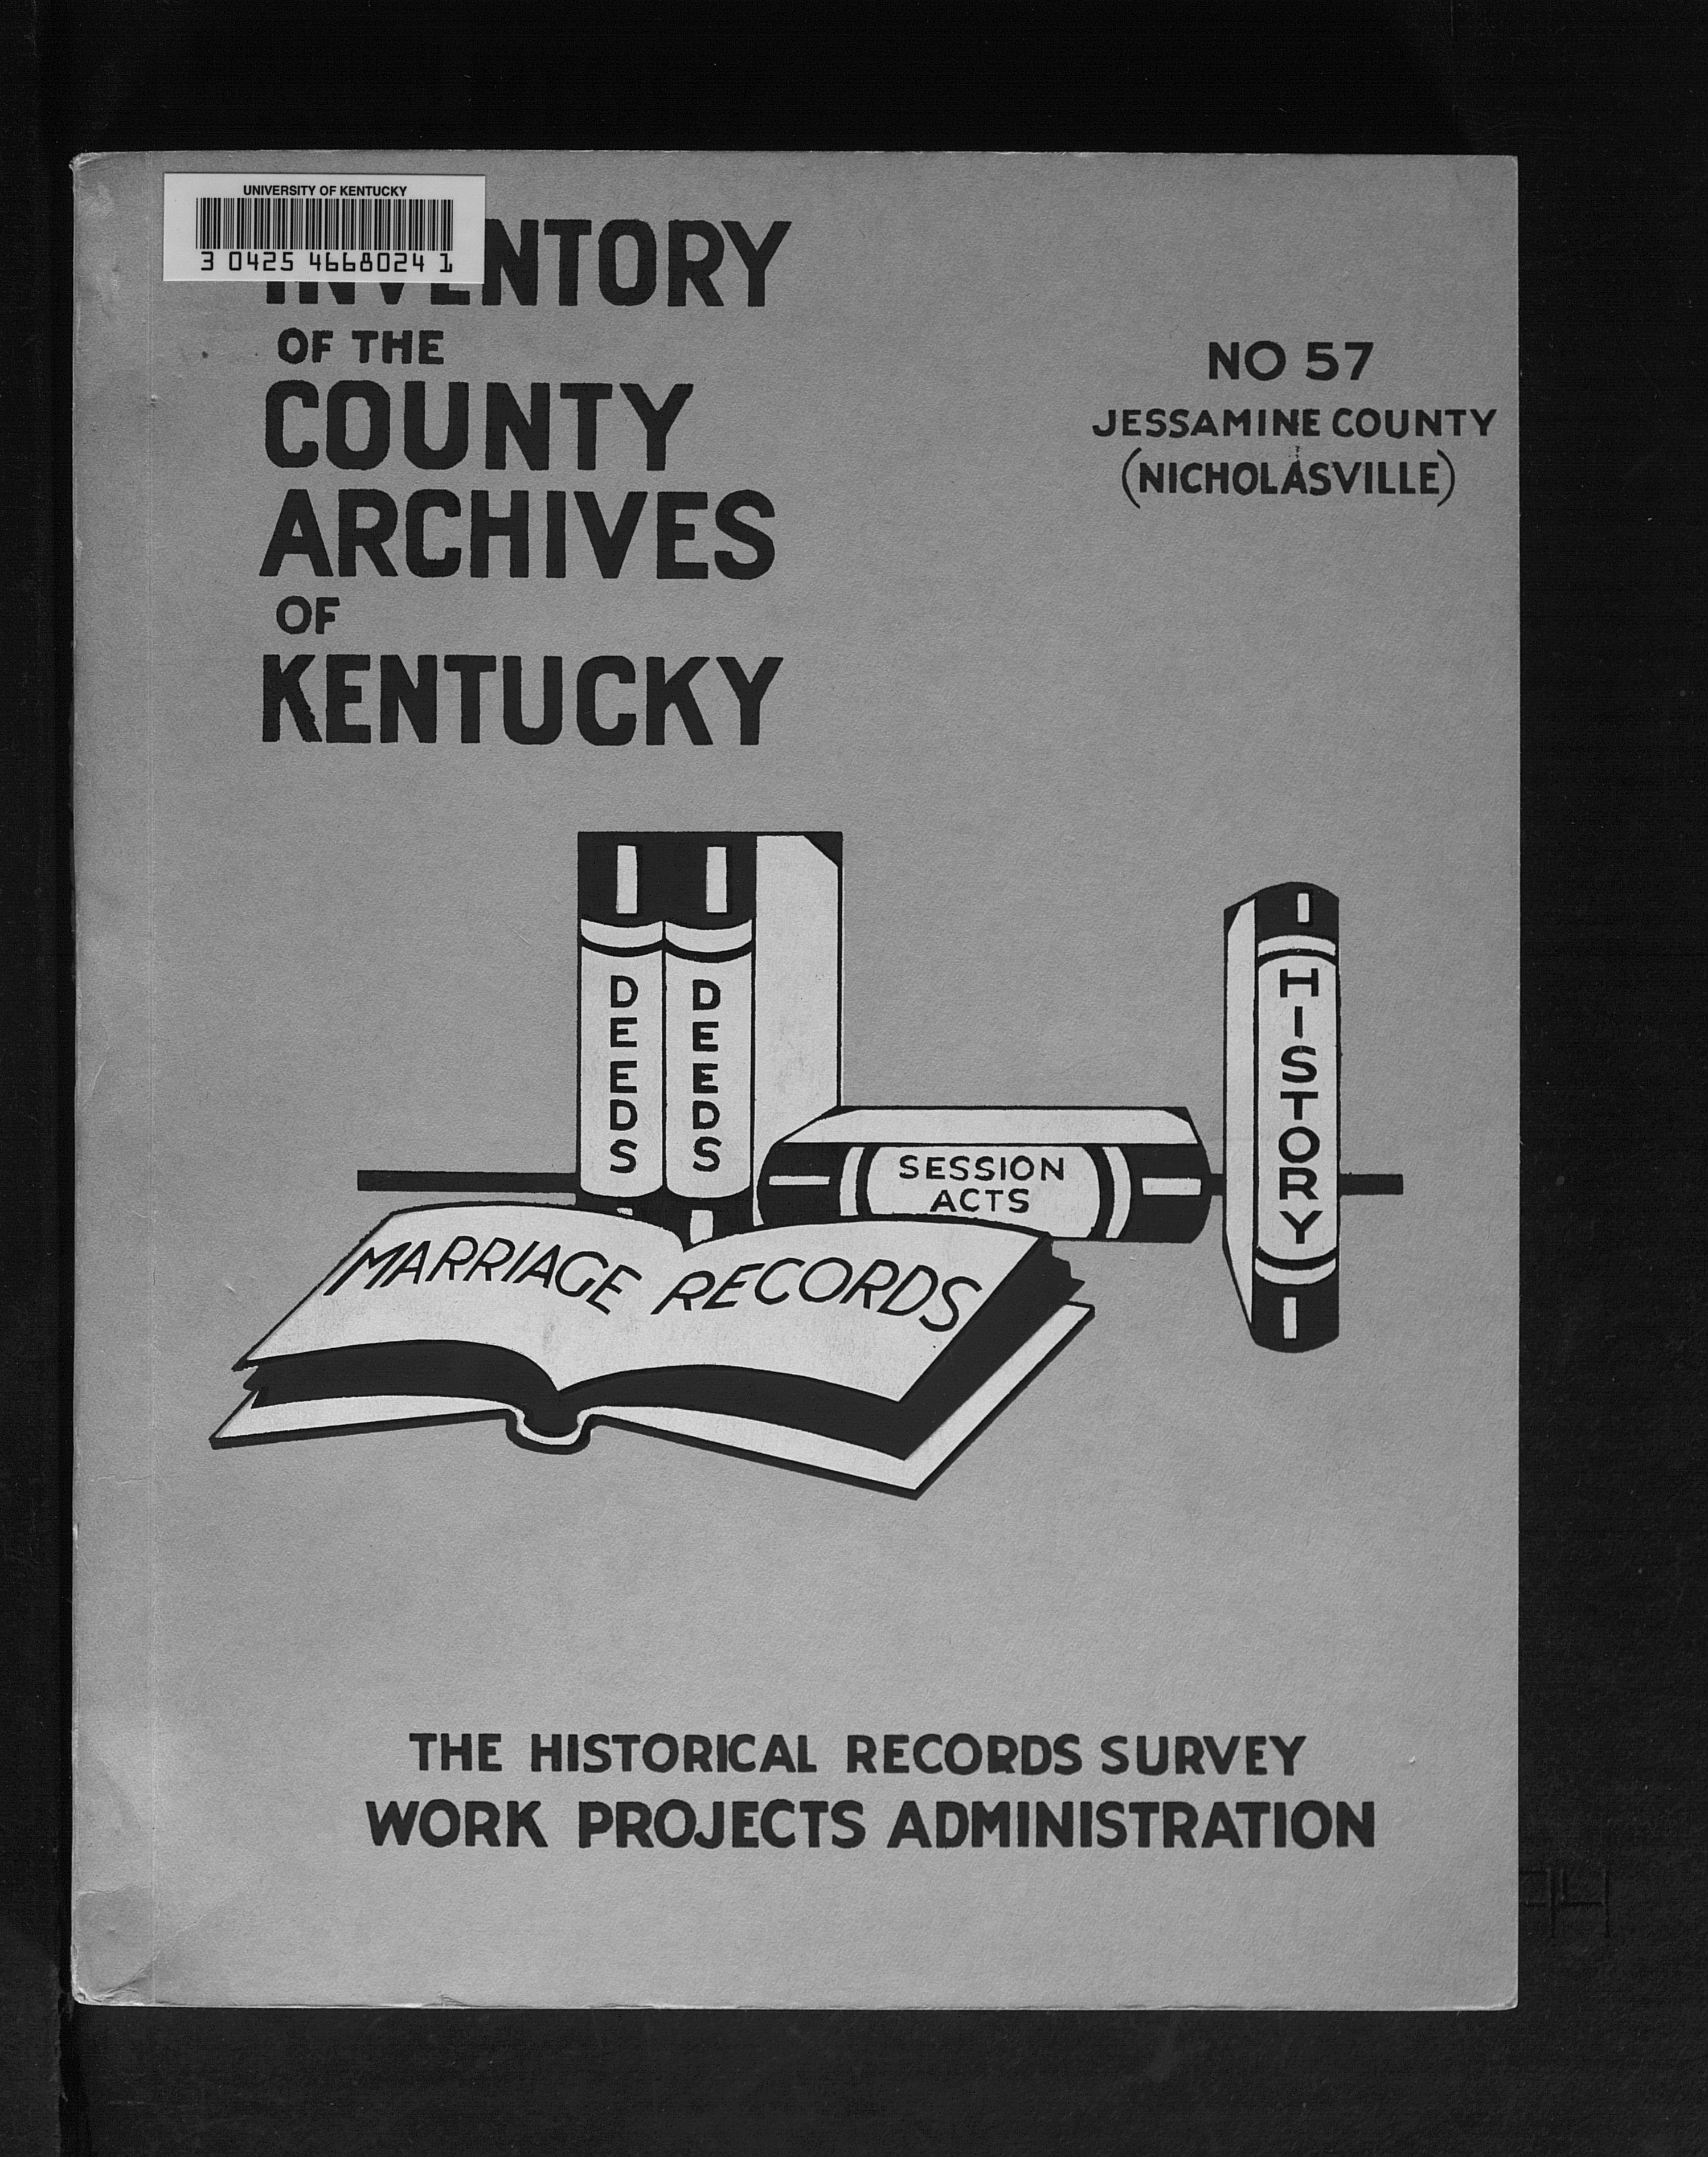 Inventory of the county archives of Kentucky. No image image